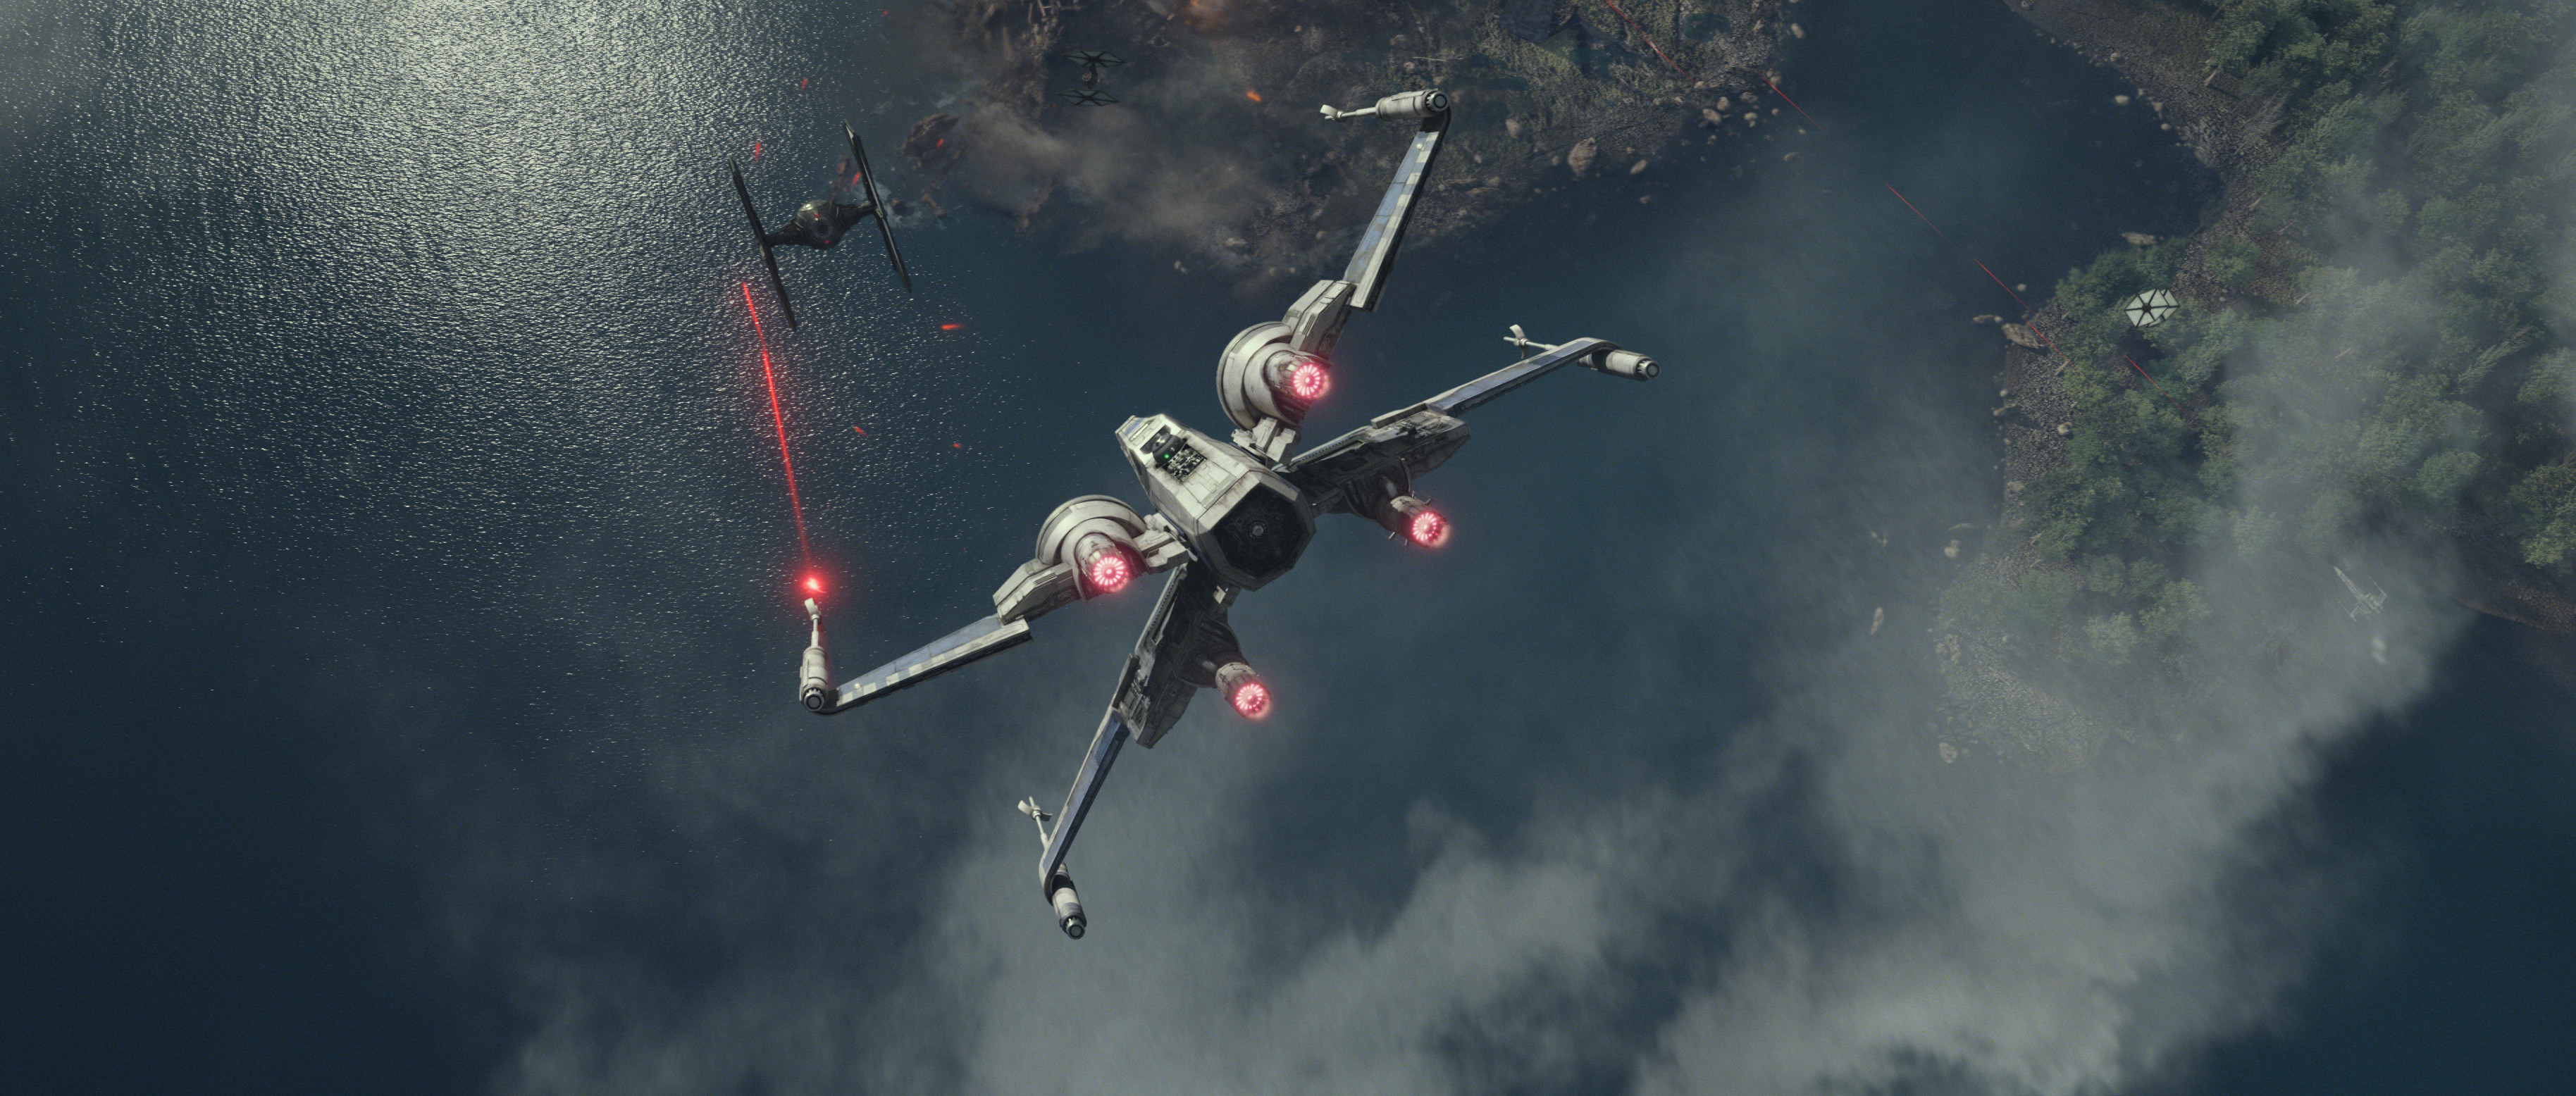 Mobile wallpaper Star Wars Movie X Wing Star Wars Episode Vii The  Force Awakens 373556 download the picture for free